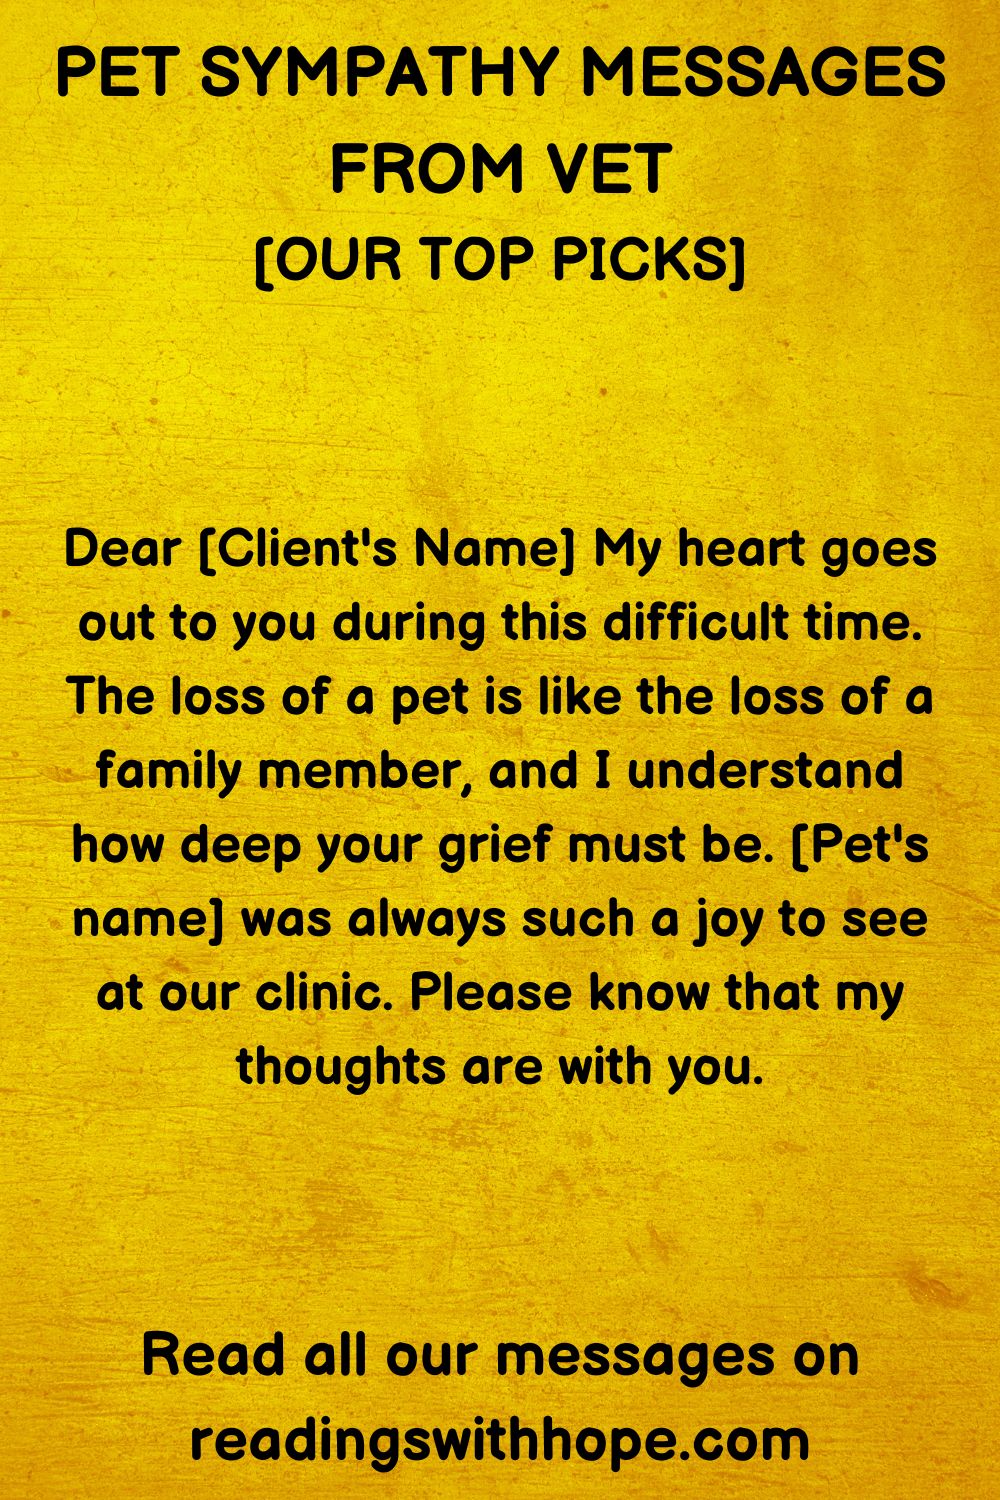 Pet Sympathy Messages from Vet